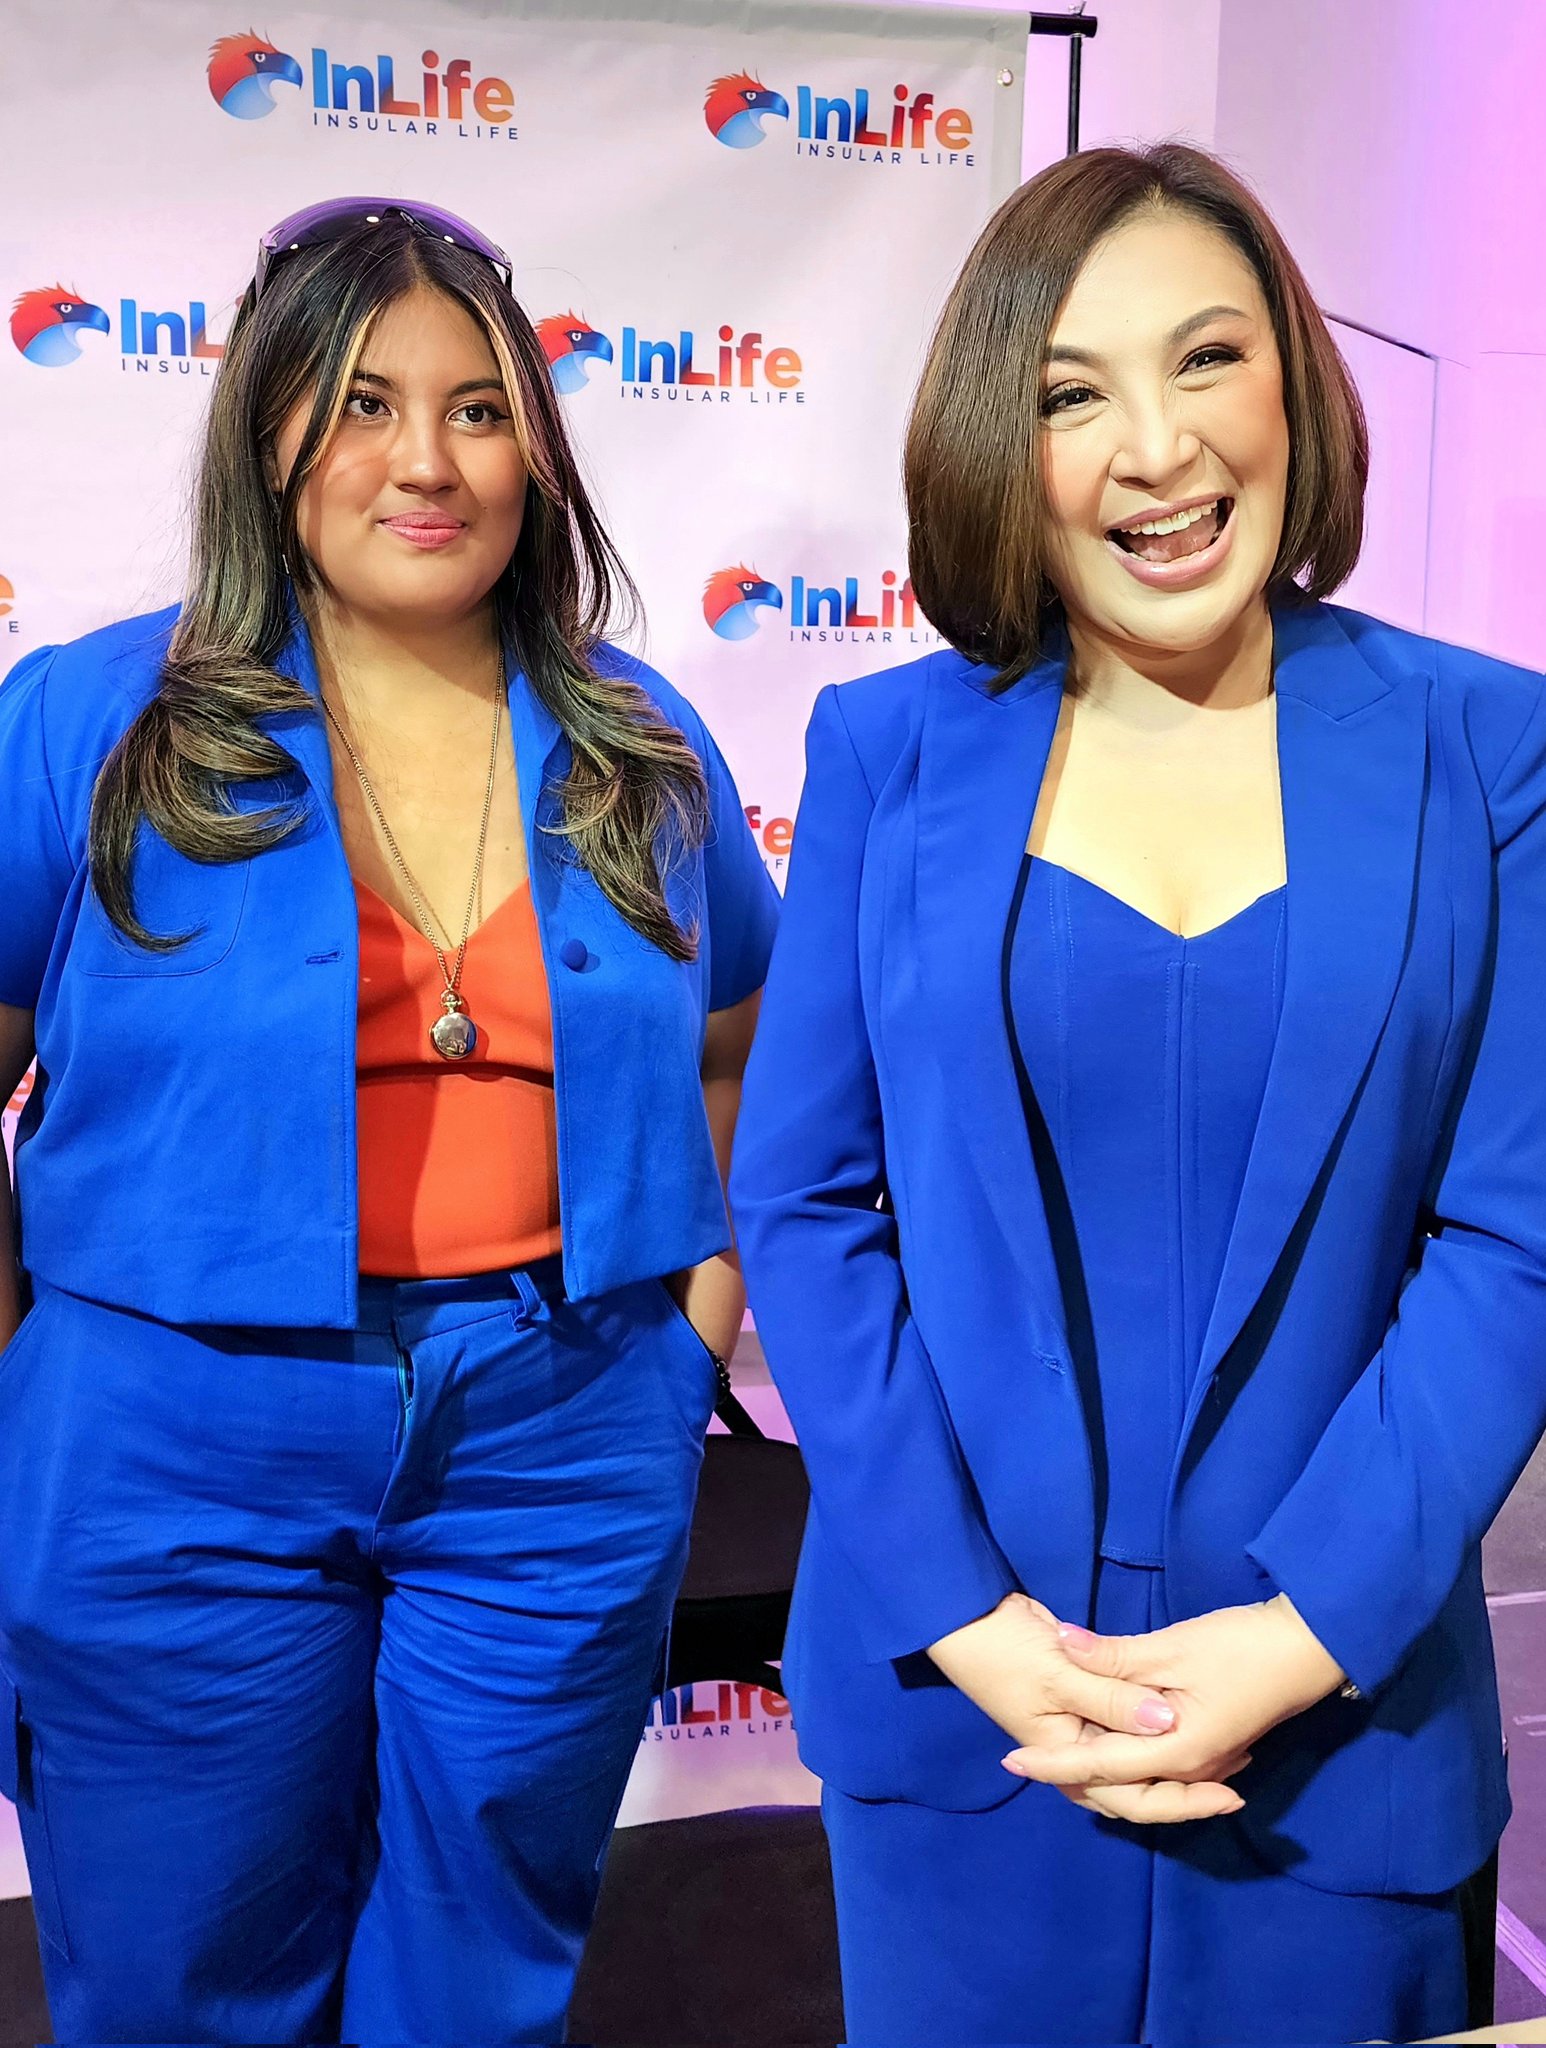 Roel Hoang Manipon on X: "Megastar Sharon Cuneta and her daughter, aspiring visual artist and LGBTQ+ advocate Miel Pangilinan become the endorsers of the latest campaign of Filipino heritage brand and company,